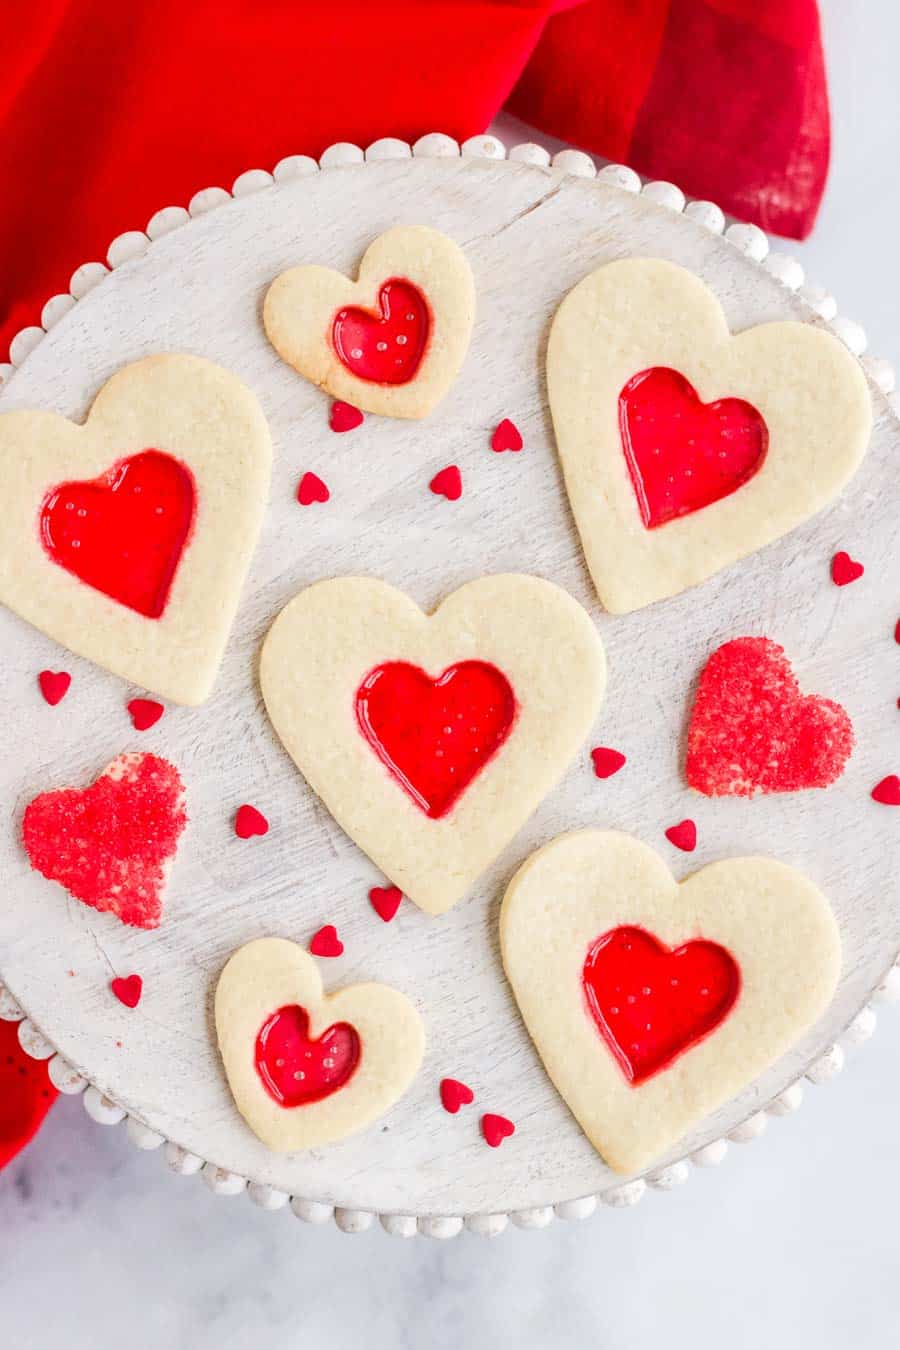 Heart shaped stained glass cookies with red melted candy in the middle